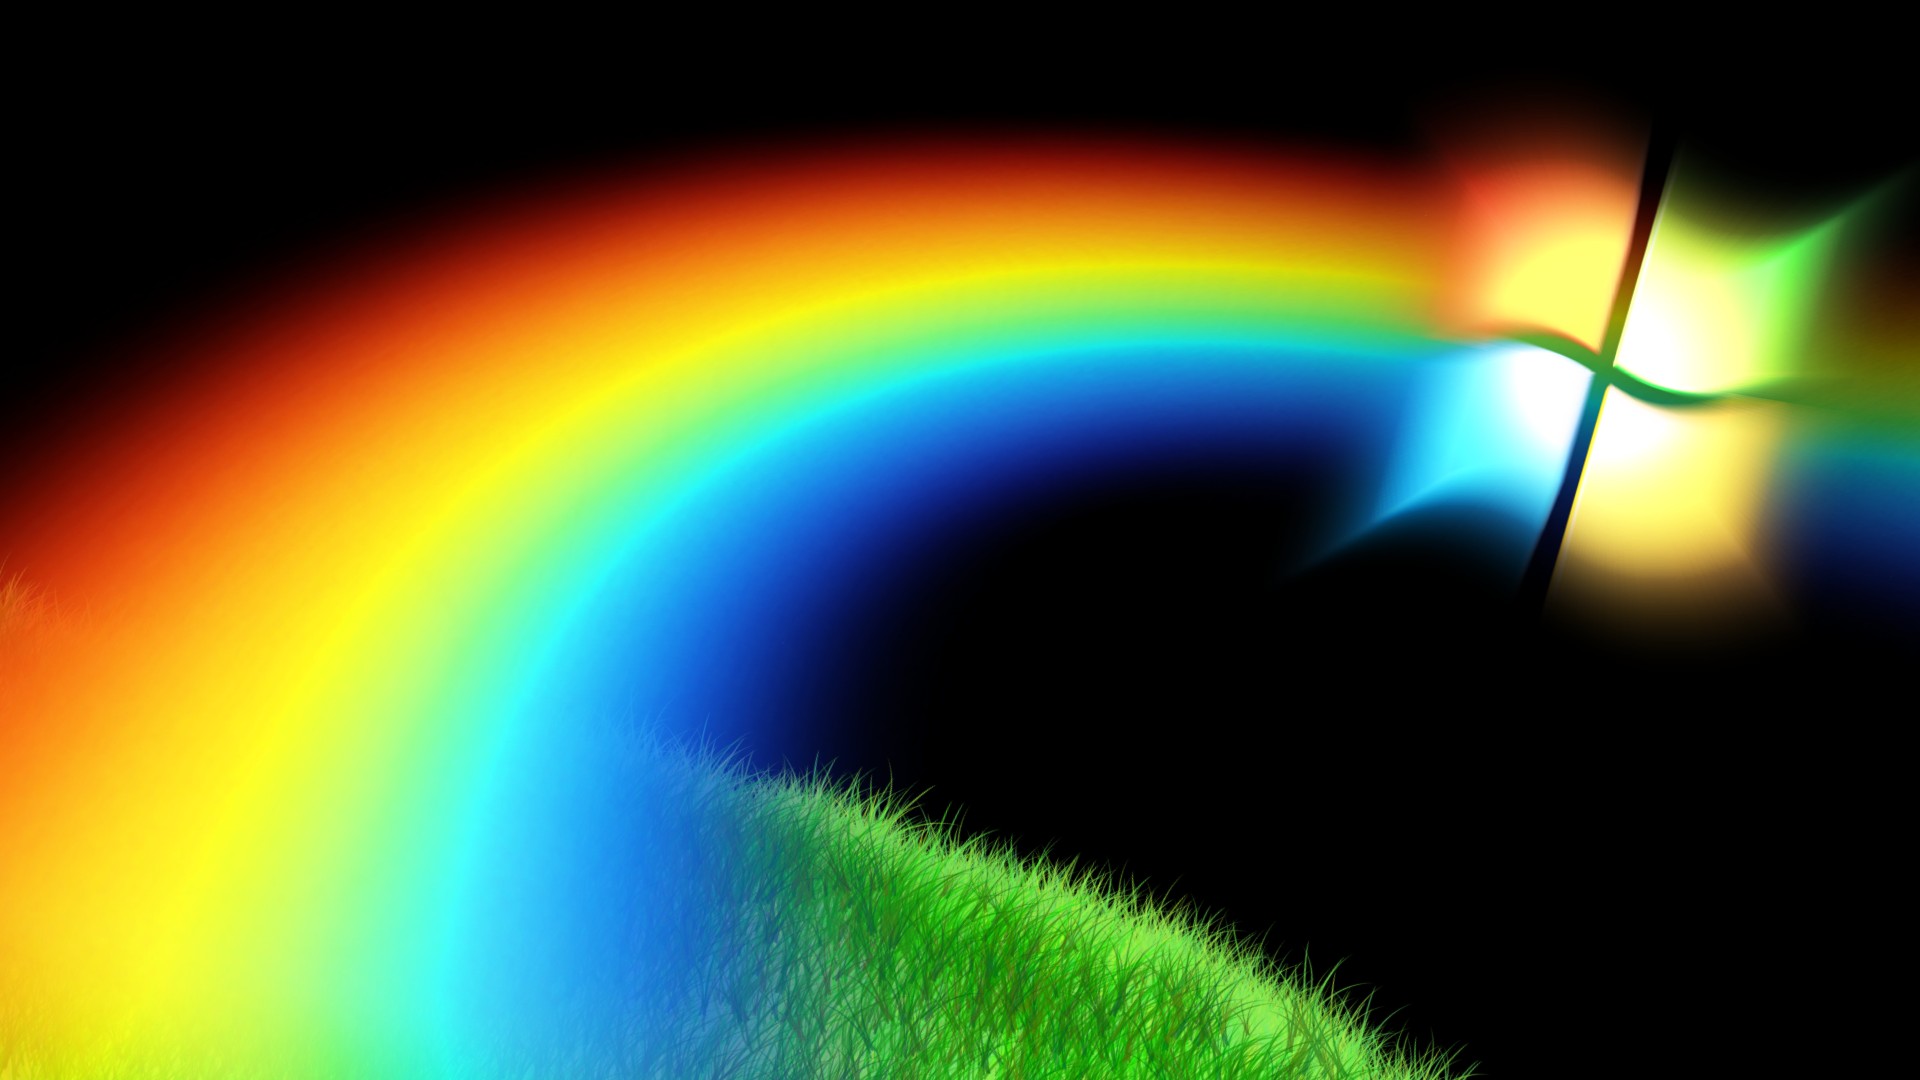 HD Cute Rainbow Backgrounds with resolution 1920X1080 pixel. You can use this wallpaper as background for your desktop Computer Screensavers, Android or iPhone smartphones